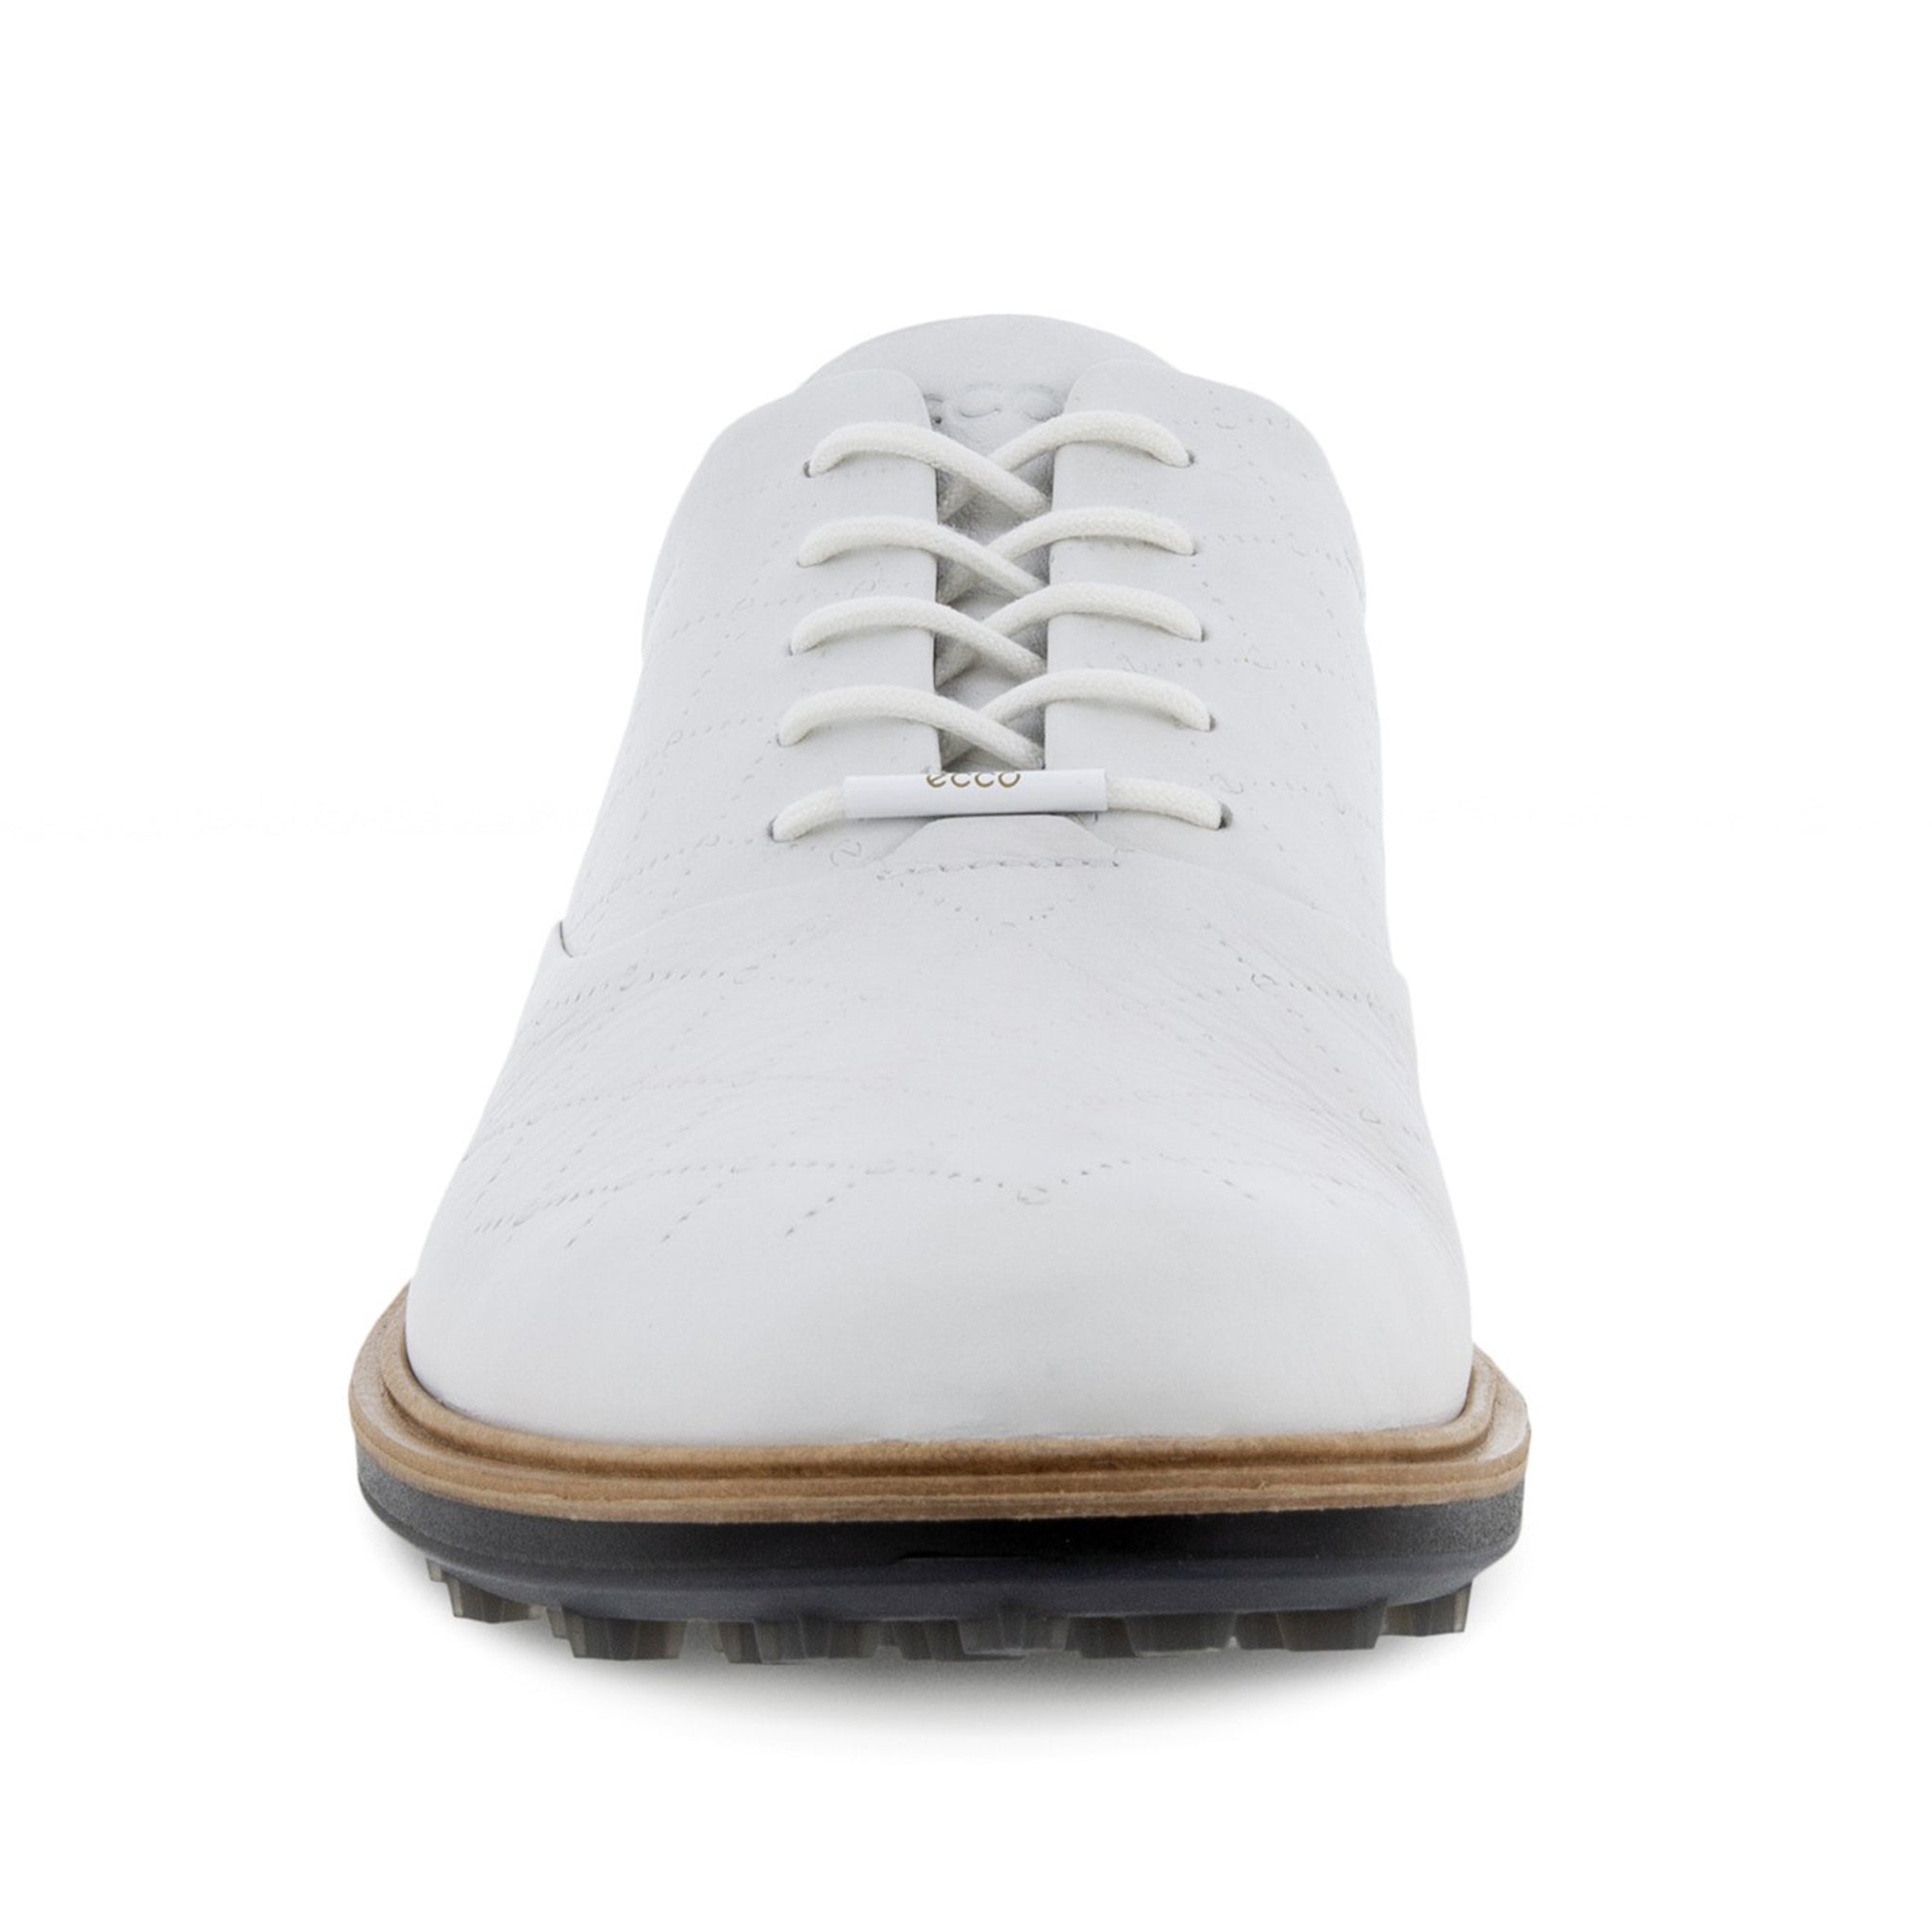 Classic Hybrid Golf Shoes White 01007 | Function18